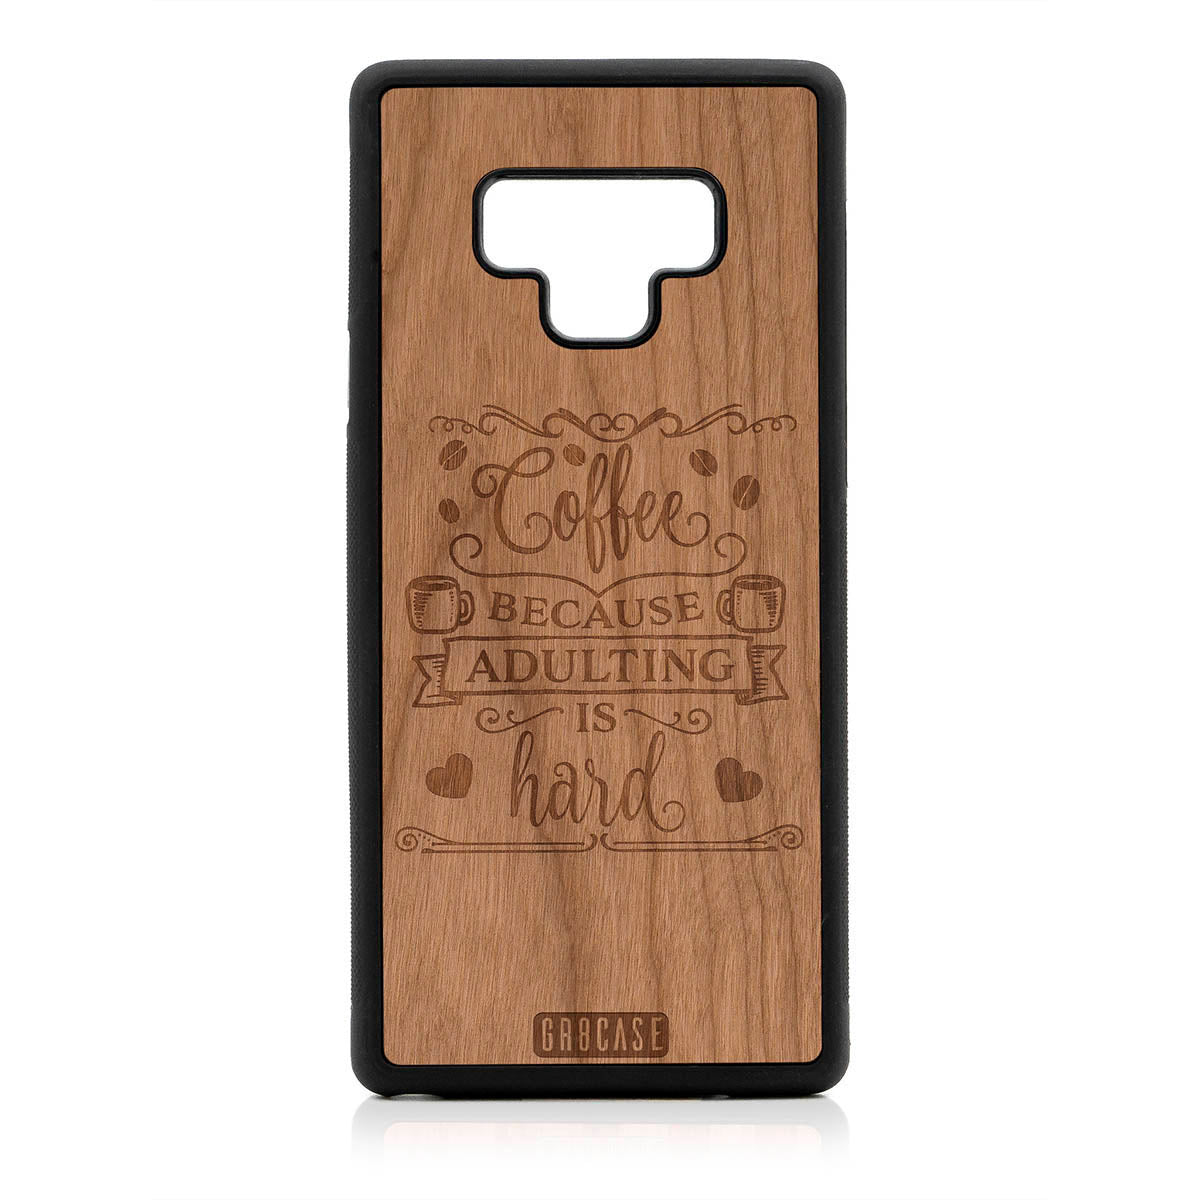 Coffee Because Adulting Is Hard Design Wood Case For Samsung Galaxy Note 9